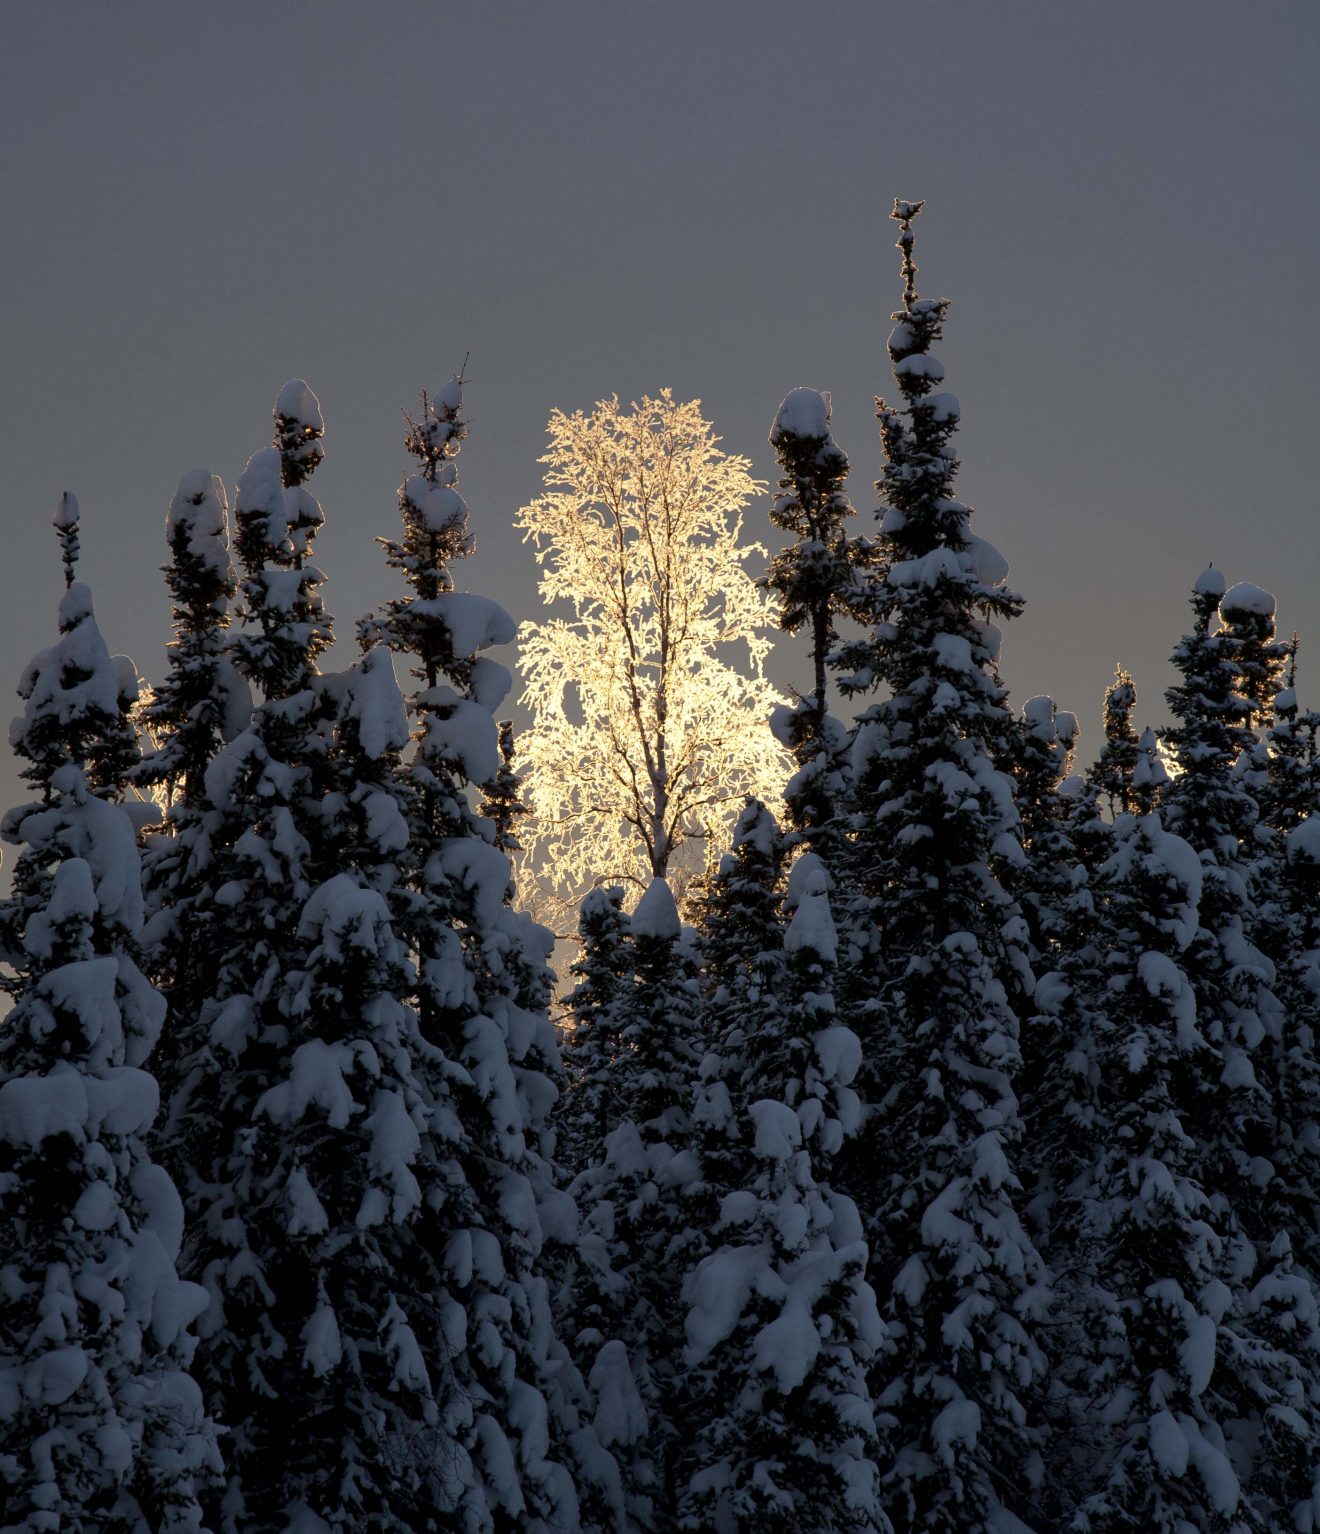 Birch tree surrounded by spruce trees in winter.